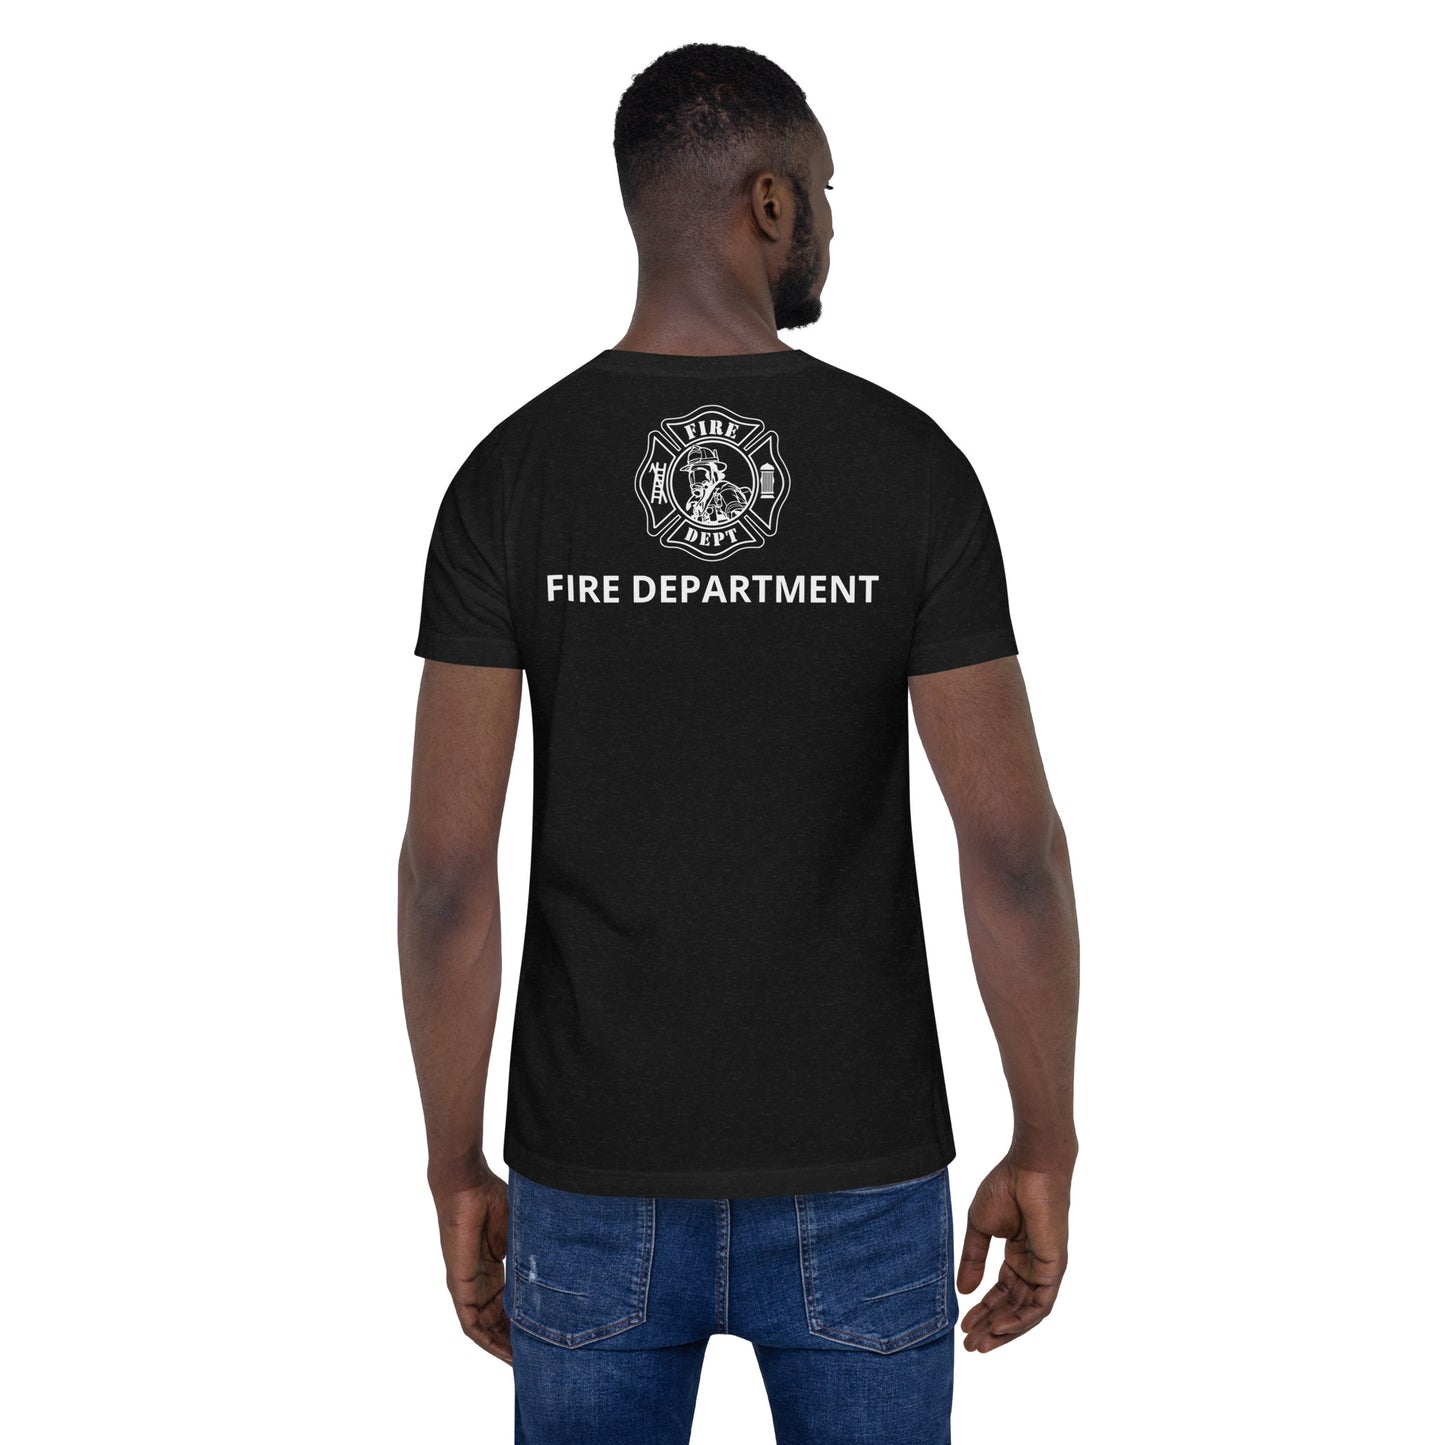 Fire Department Maltese Cross Front and Back Unisex Premium T-shirt